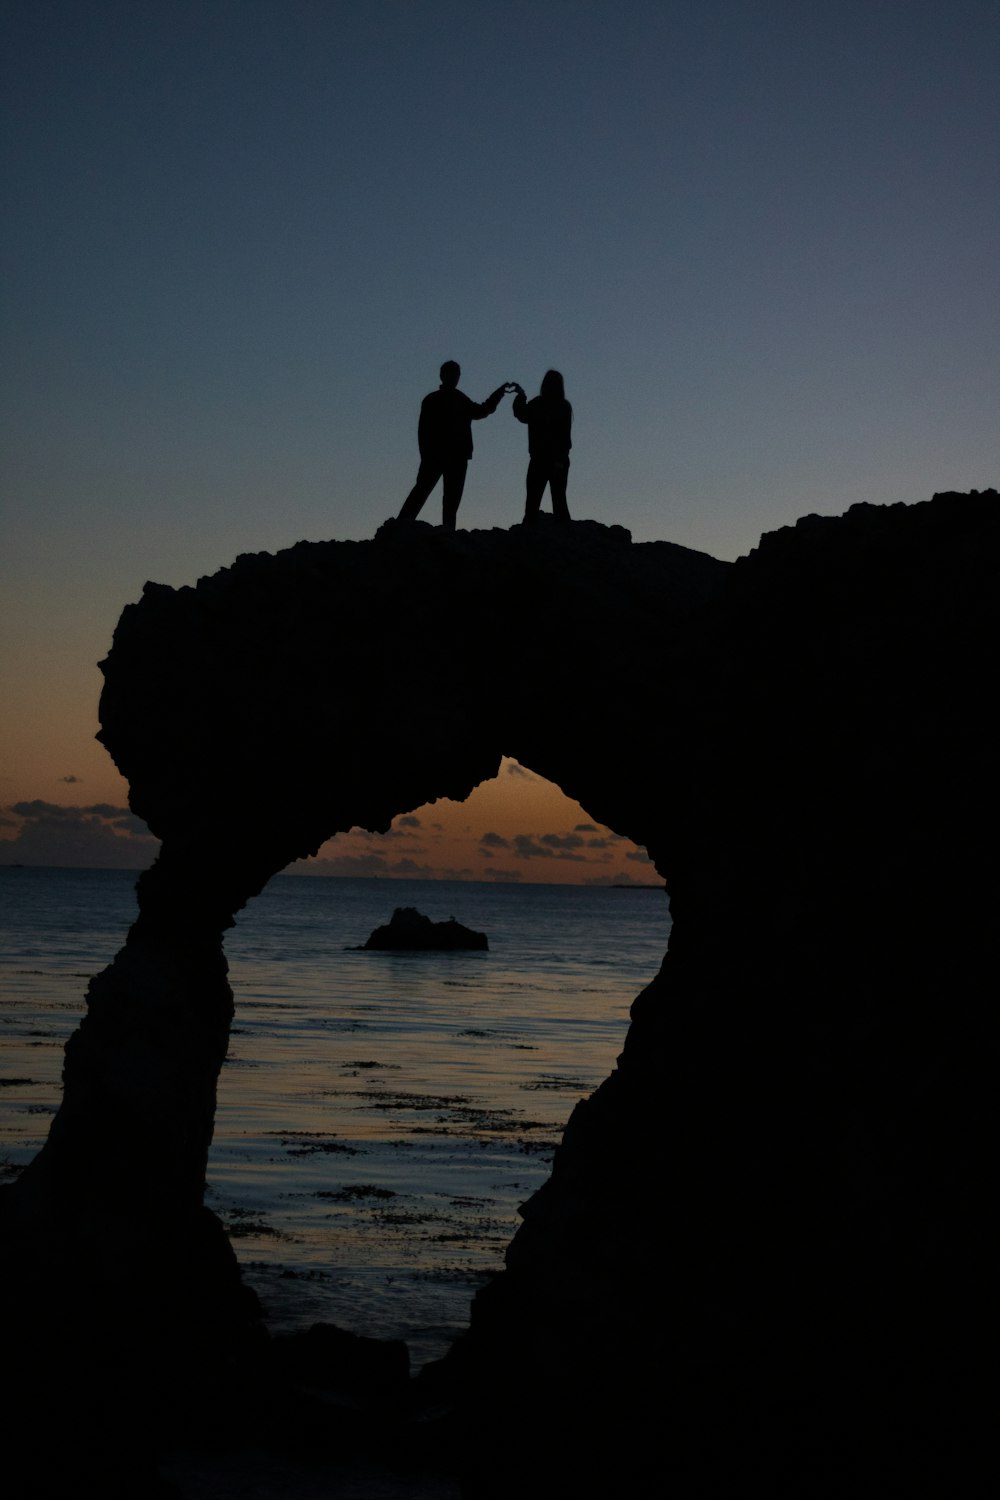 silhouette of two persons atop a rock formation near the ocean